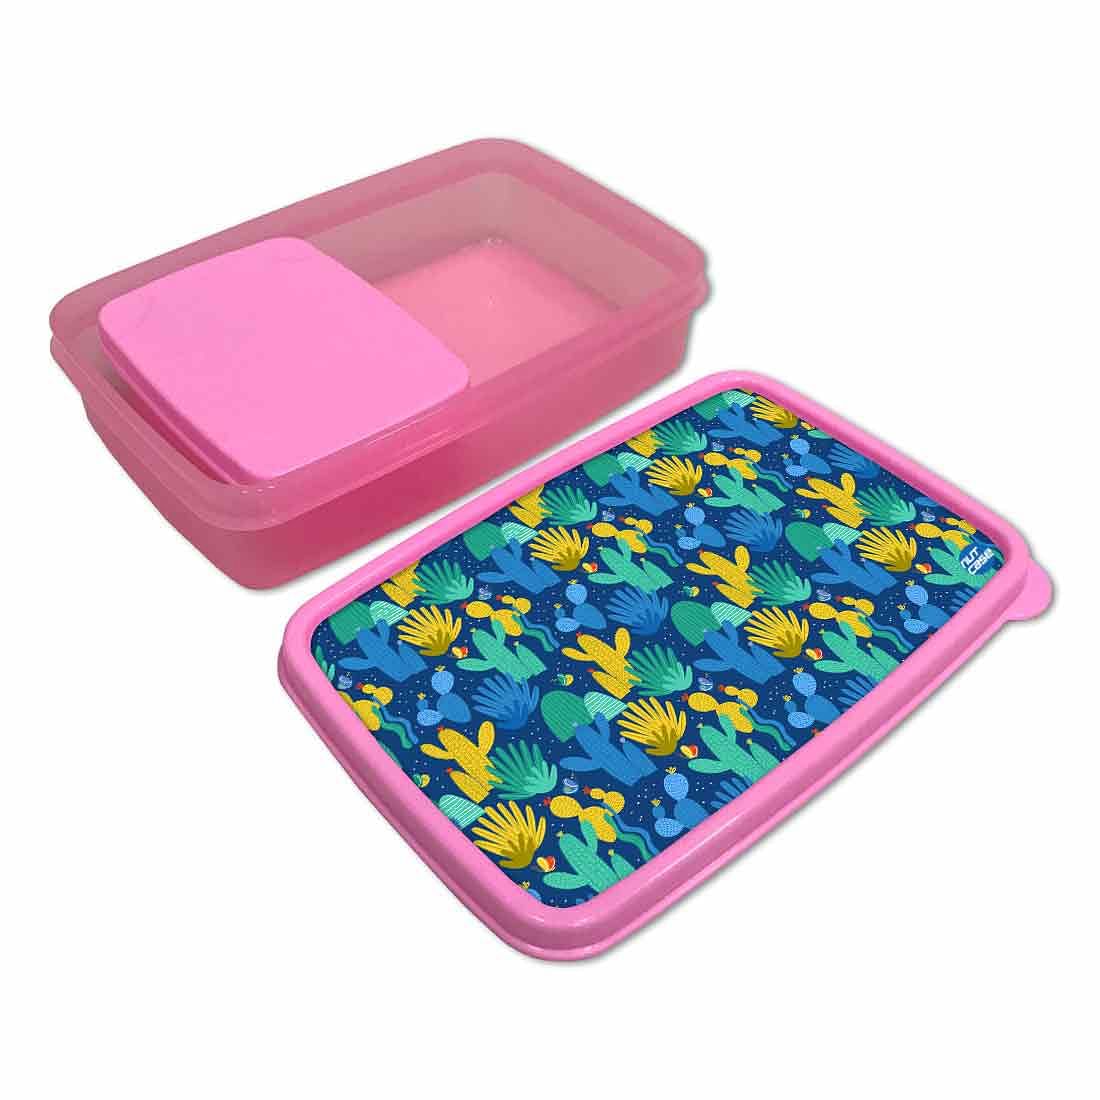 Designer Childrens Lunch Box for Girls Return Gifts Birthday Party - Cactus Nutcase